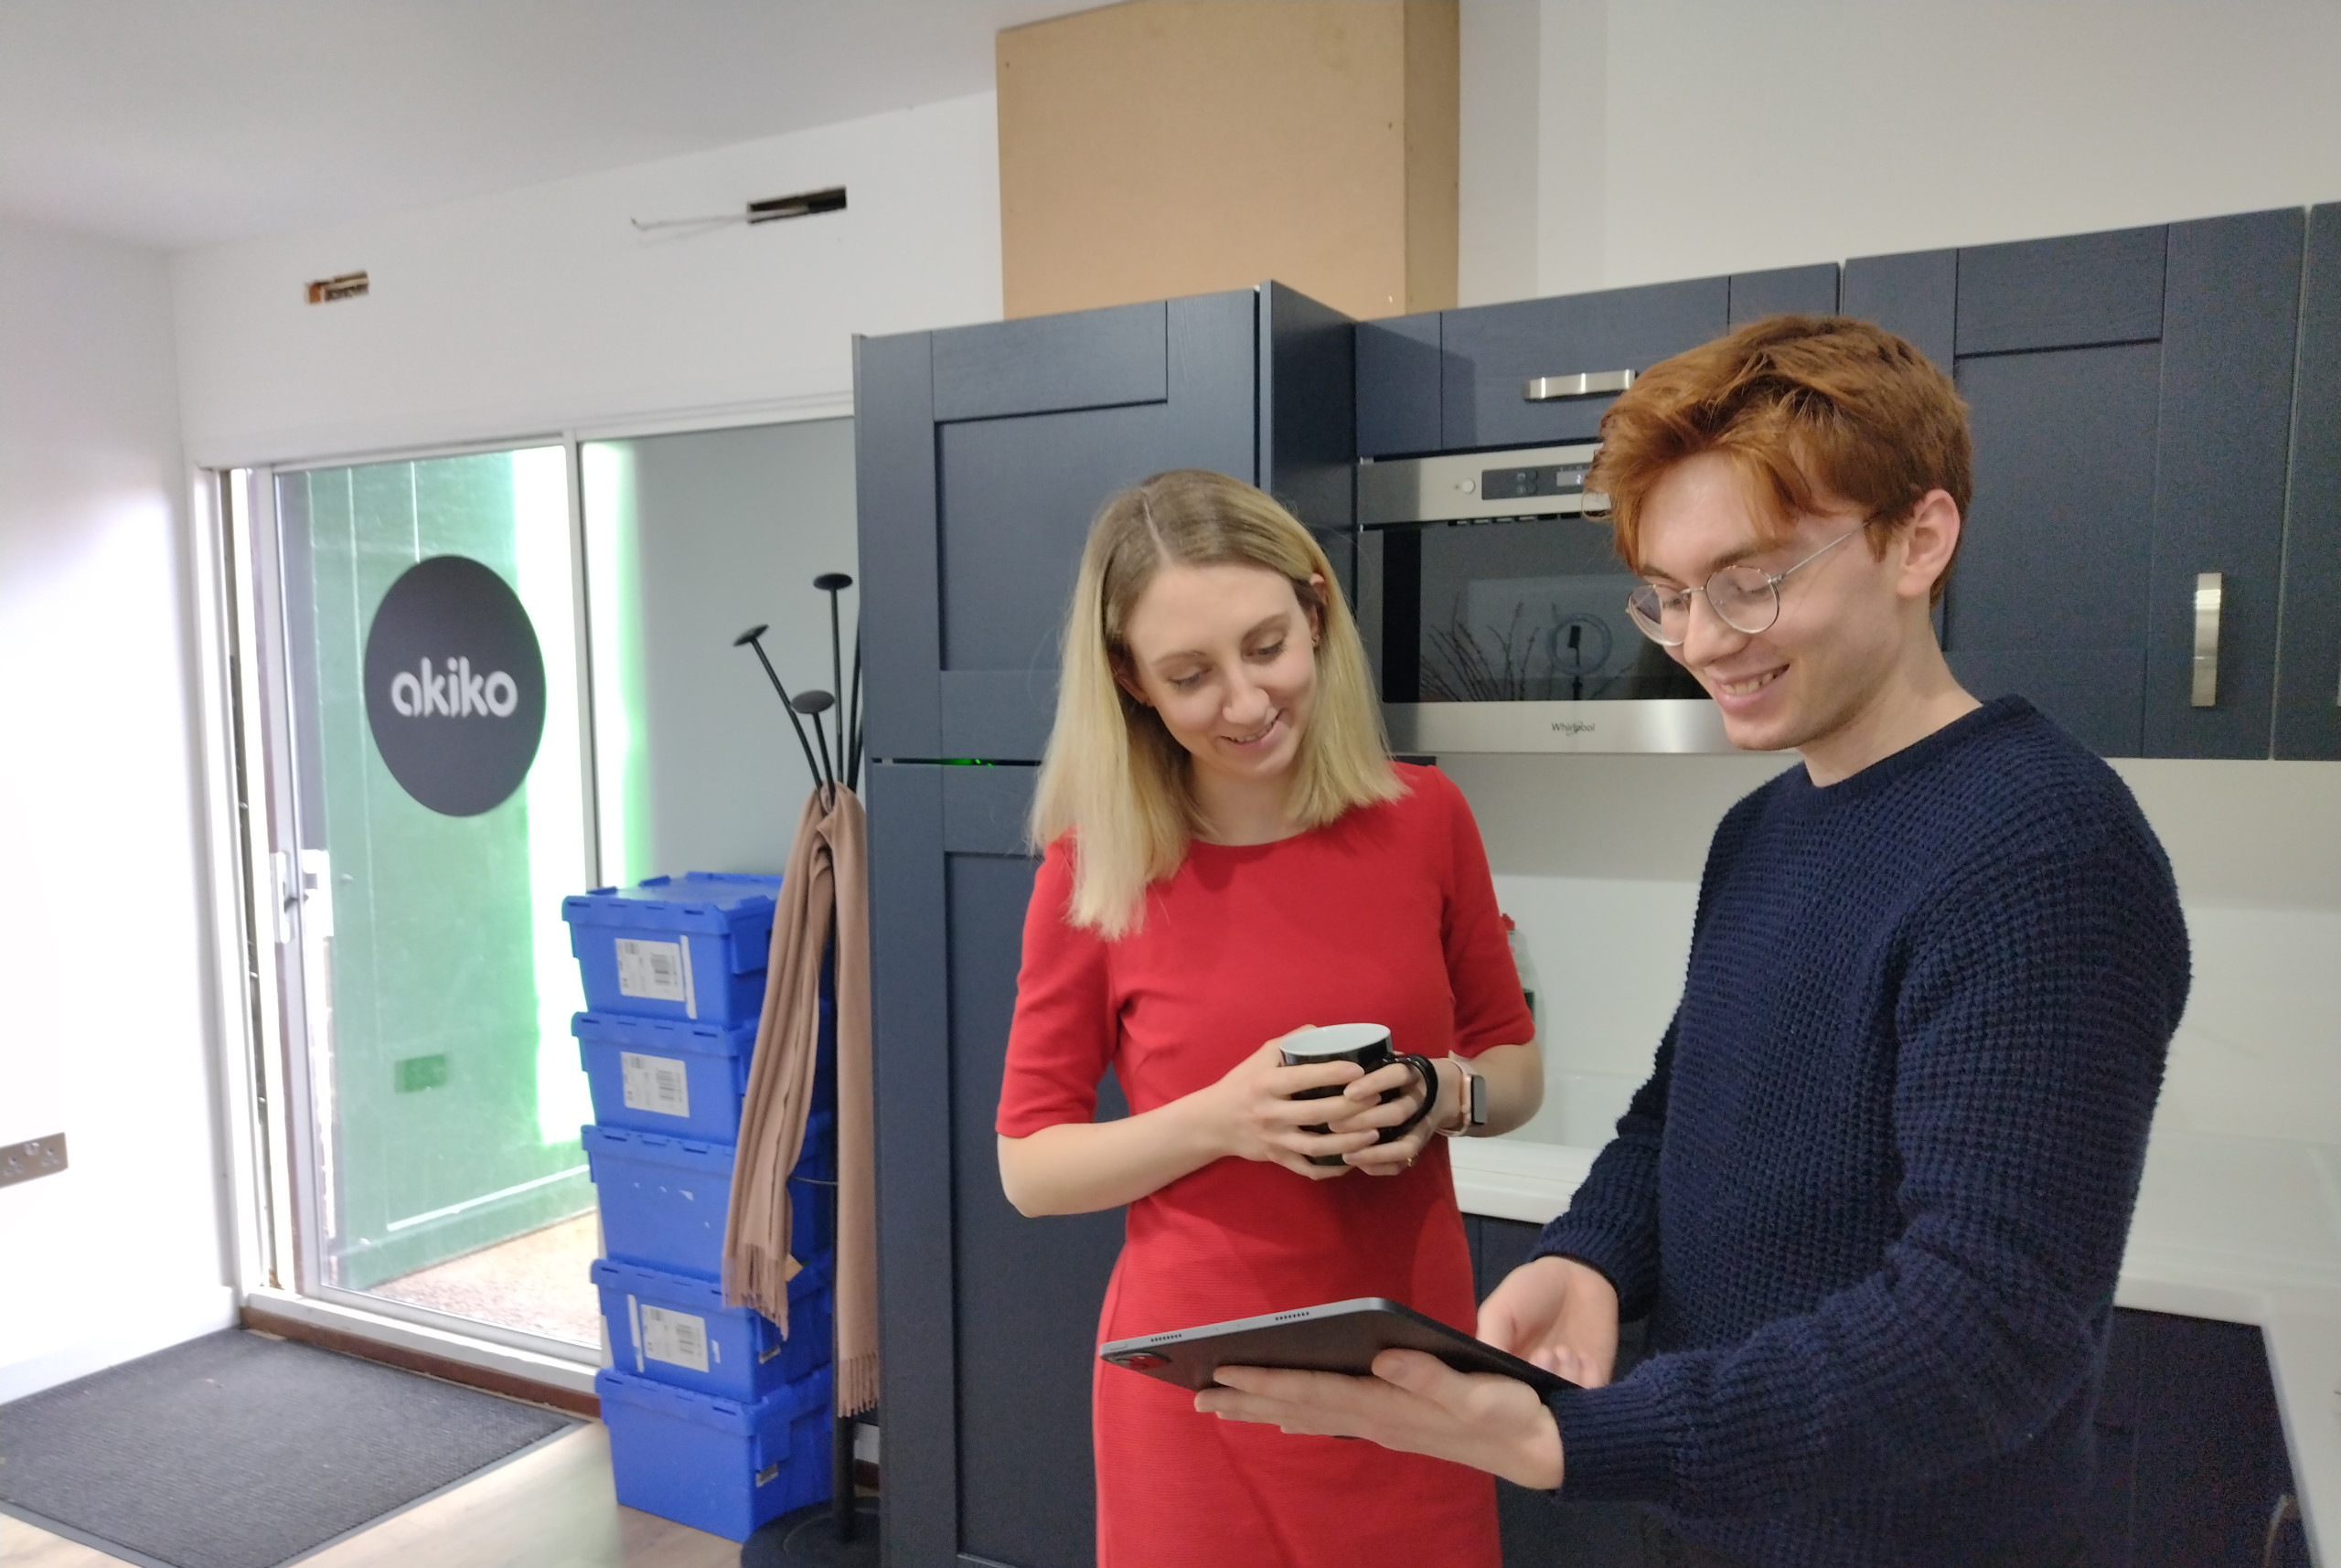 Deputy Police and Crime Commissioner for Surrey Ellie Vesey-Thompson with graphic design student Jack Dunlop inside the Akiko Design studios in Bramley